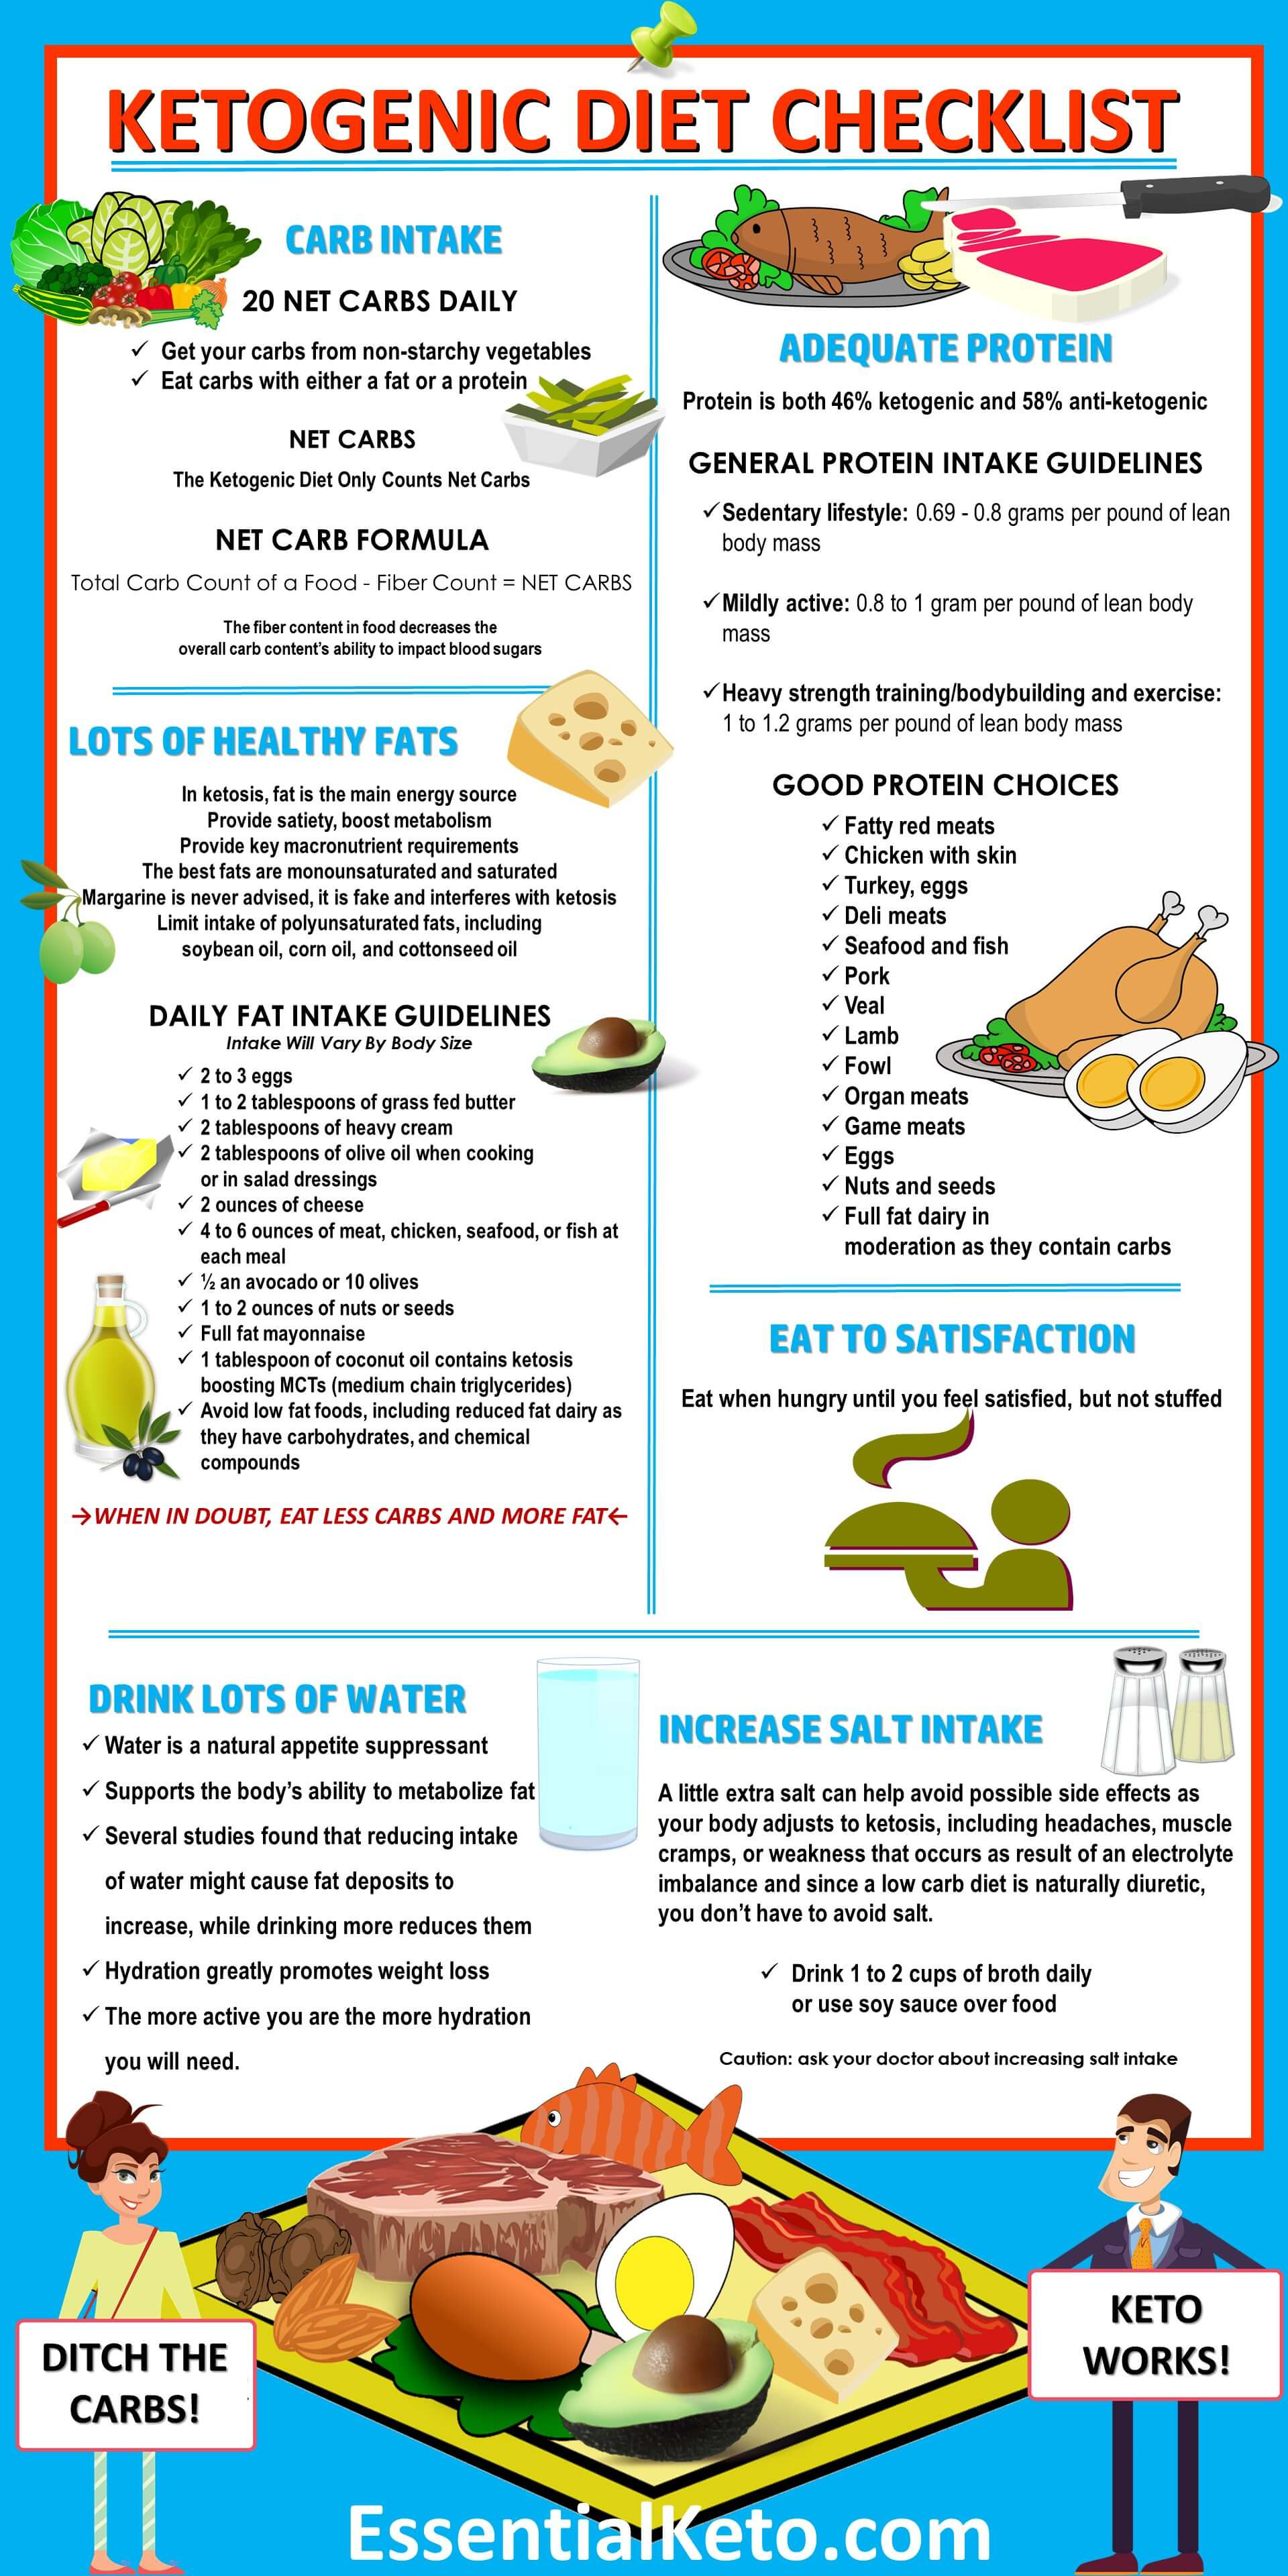 Foods To Eat On A Keto Diet
 Ketogenic Diet Foods Checklist